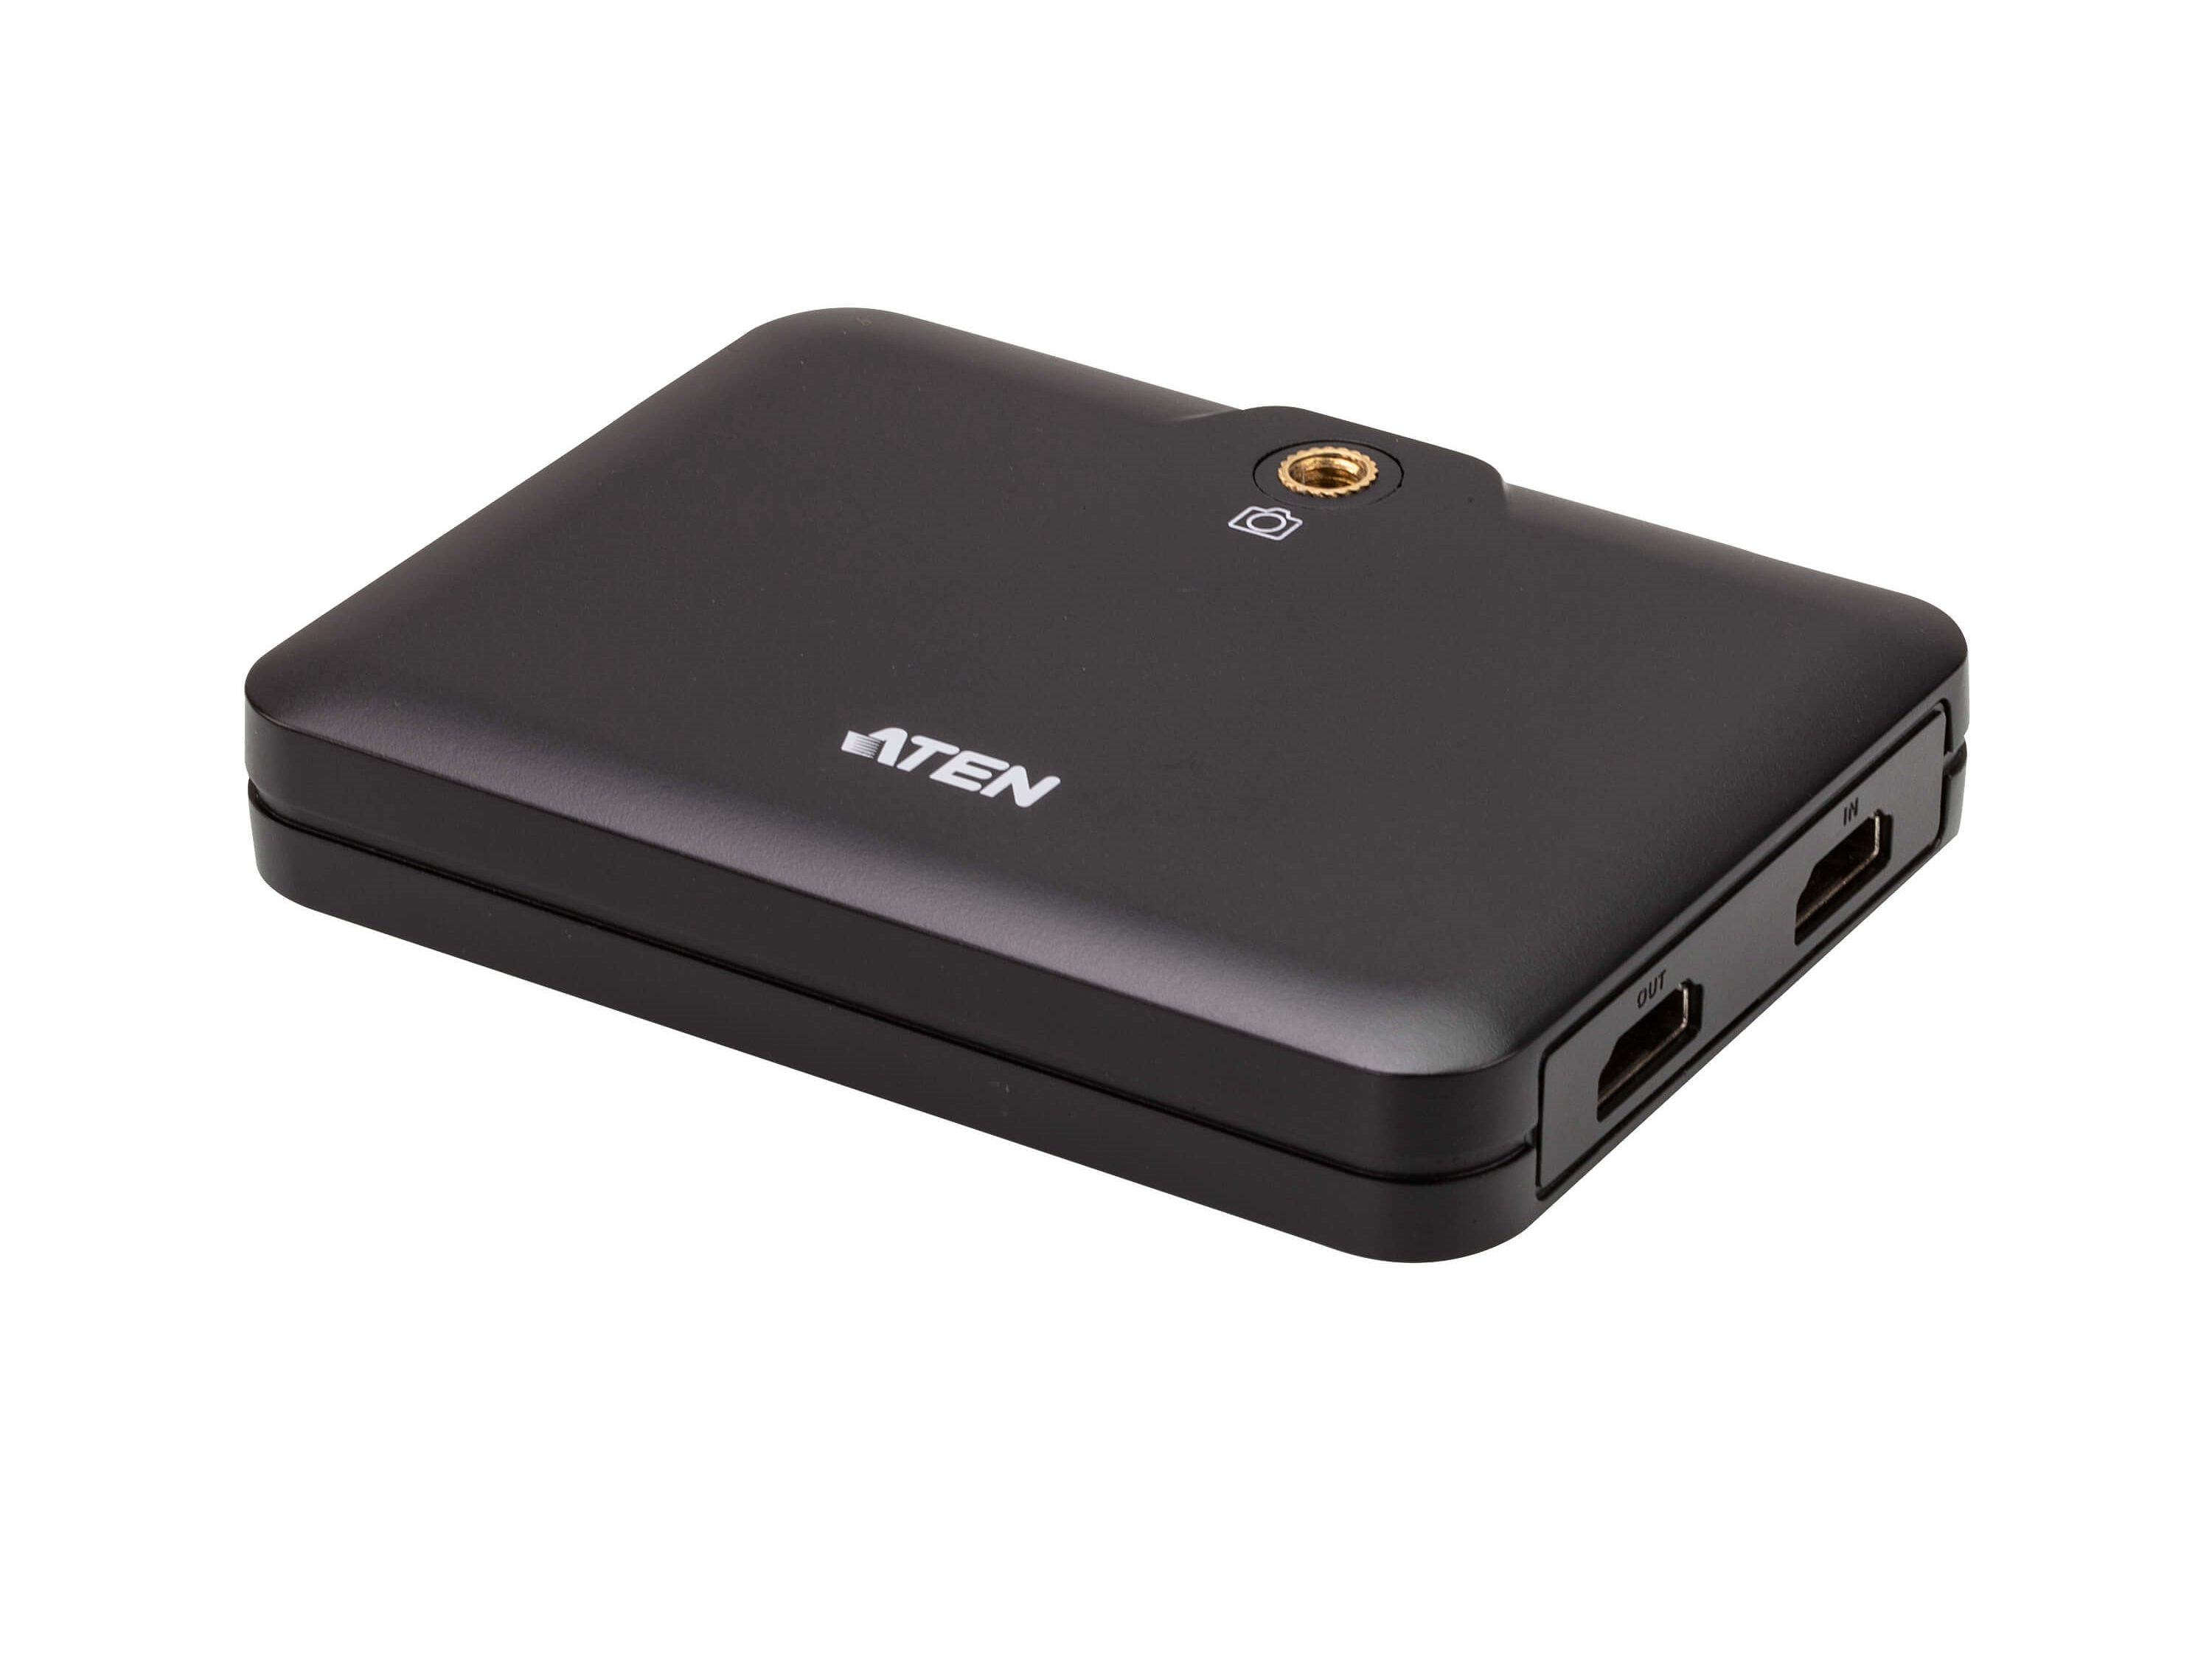 Aten UC3021 CAMLIVE  (HDMI to USB-C UVC Video Capture with PD3.0 Power Pass-Through)